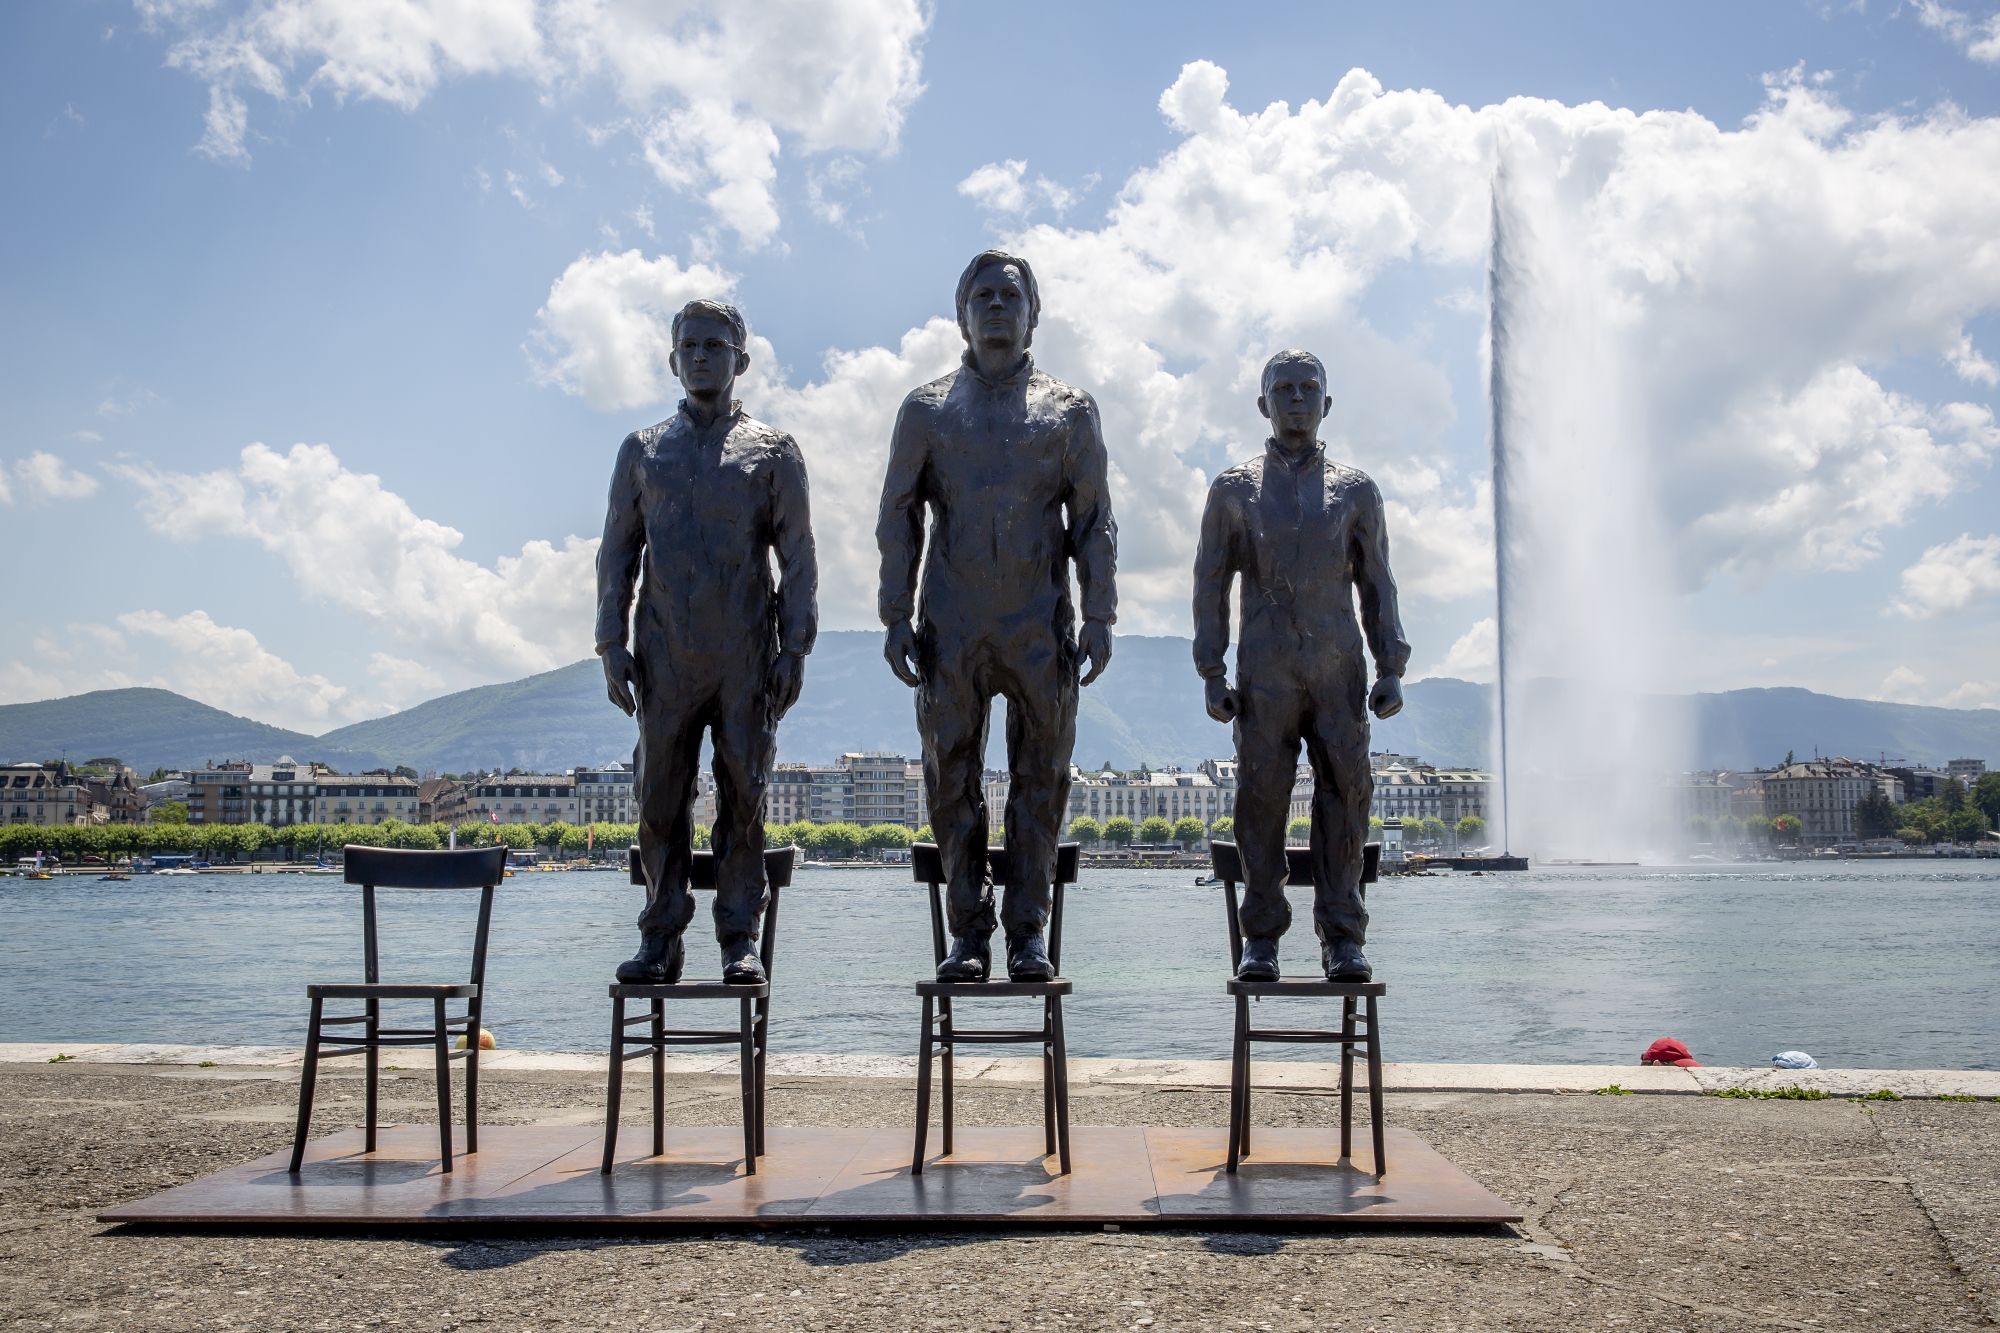 The sculpture "AnythingToSay?" by Davide Dormino representing the whistleblowers Edward Snowden, Chelsea Manning and WikiLeaks founder Julian Assange is installed on the Paquis pier in front of the Geneva Jet d'eau, on Friday, 4 June 2021, in Geneva, Switzerland. The sculpture will be officially inaugurated on the 5 June, the day after the launch of the Geneva Call to free Julian Assange. (KEYSTONE/Magali Girardin)